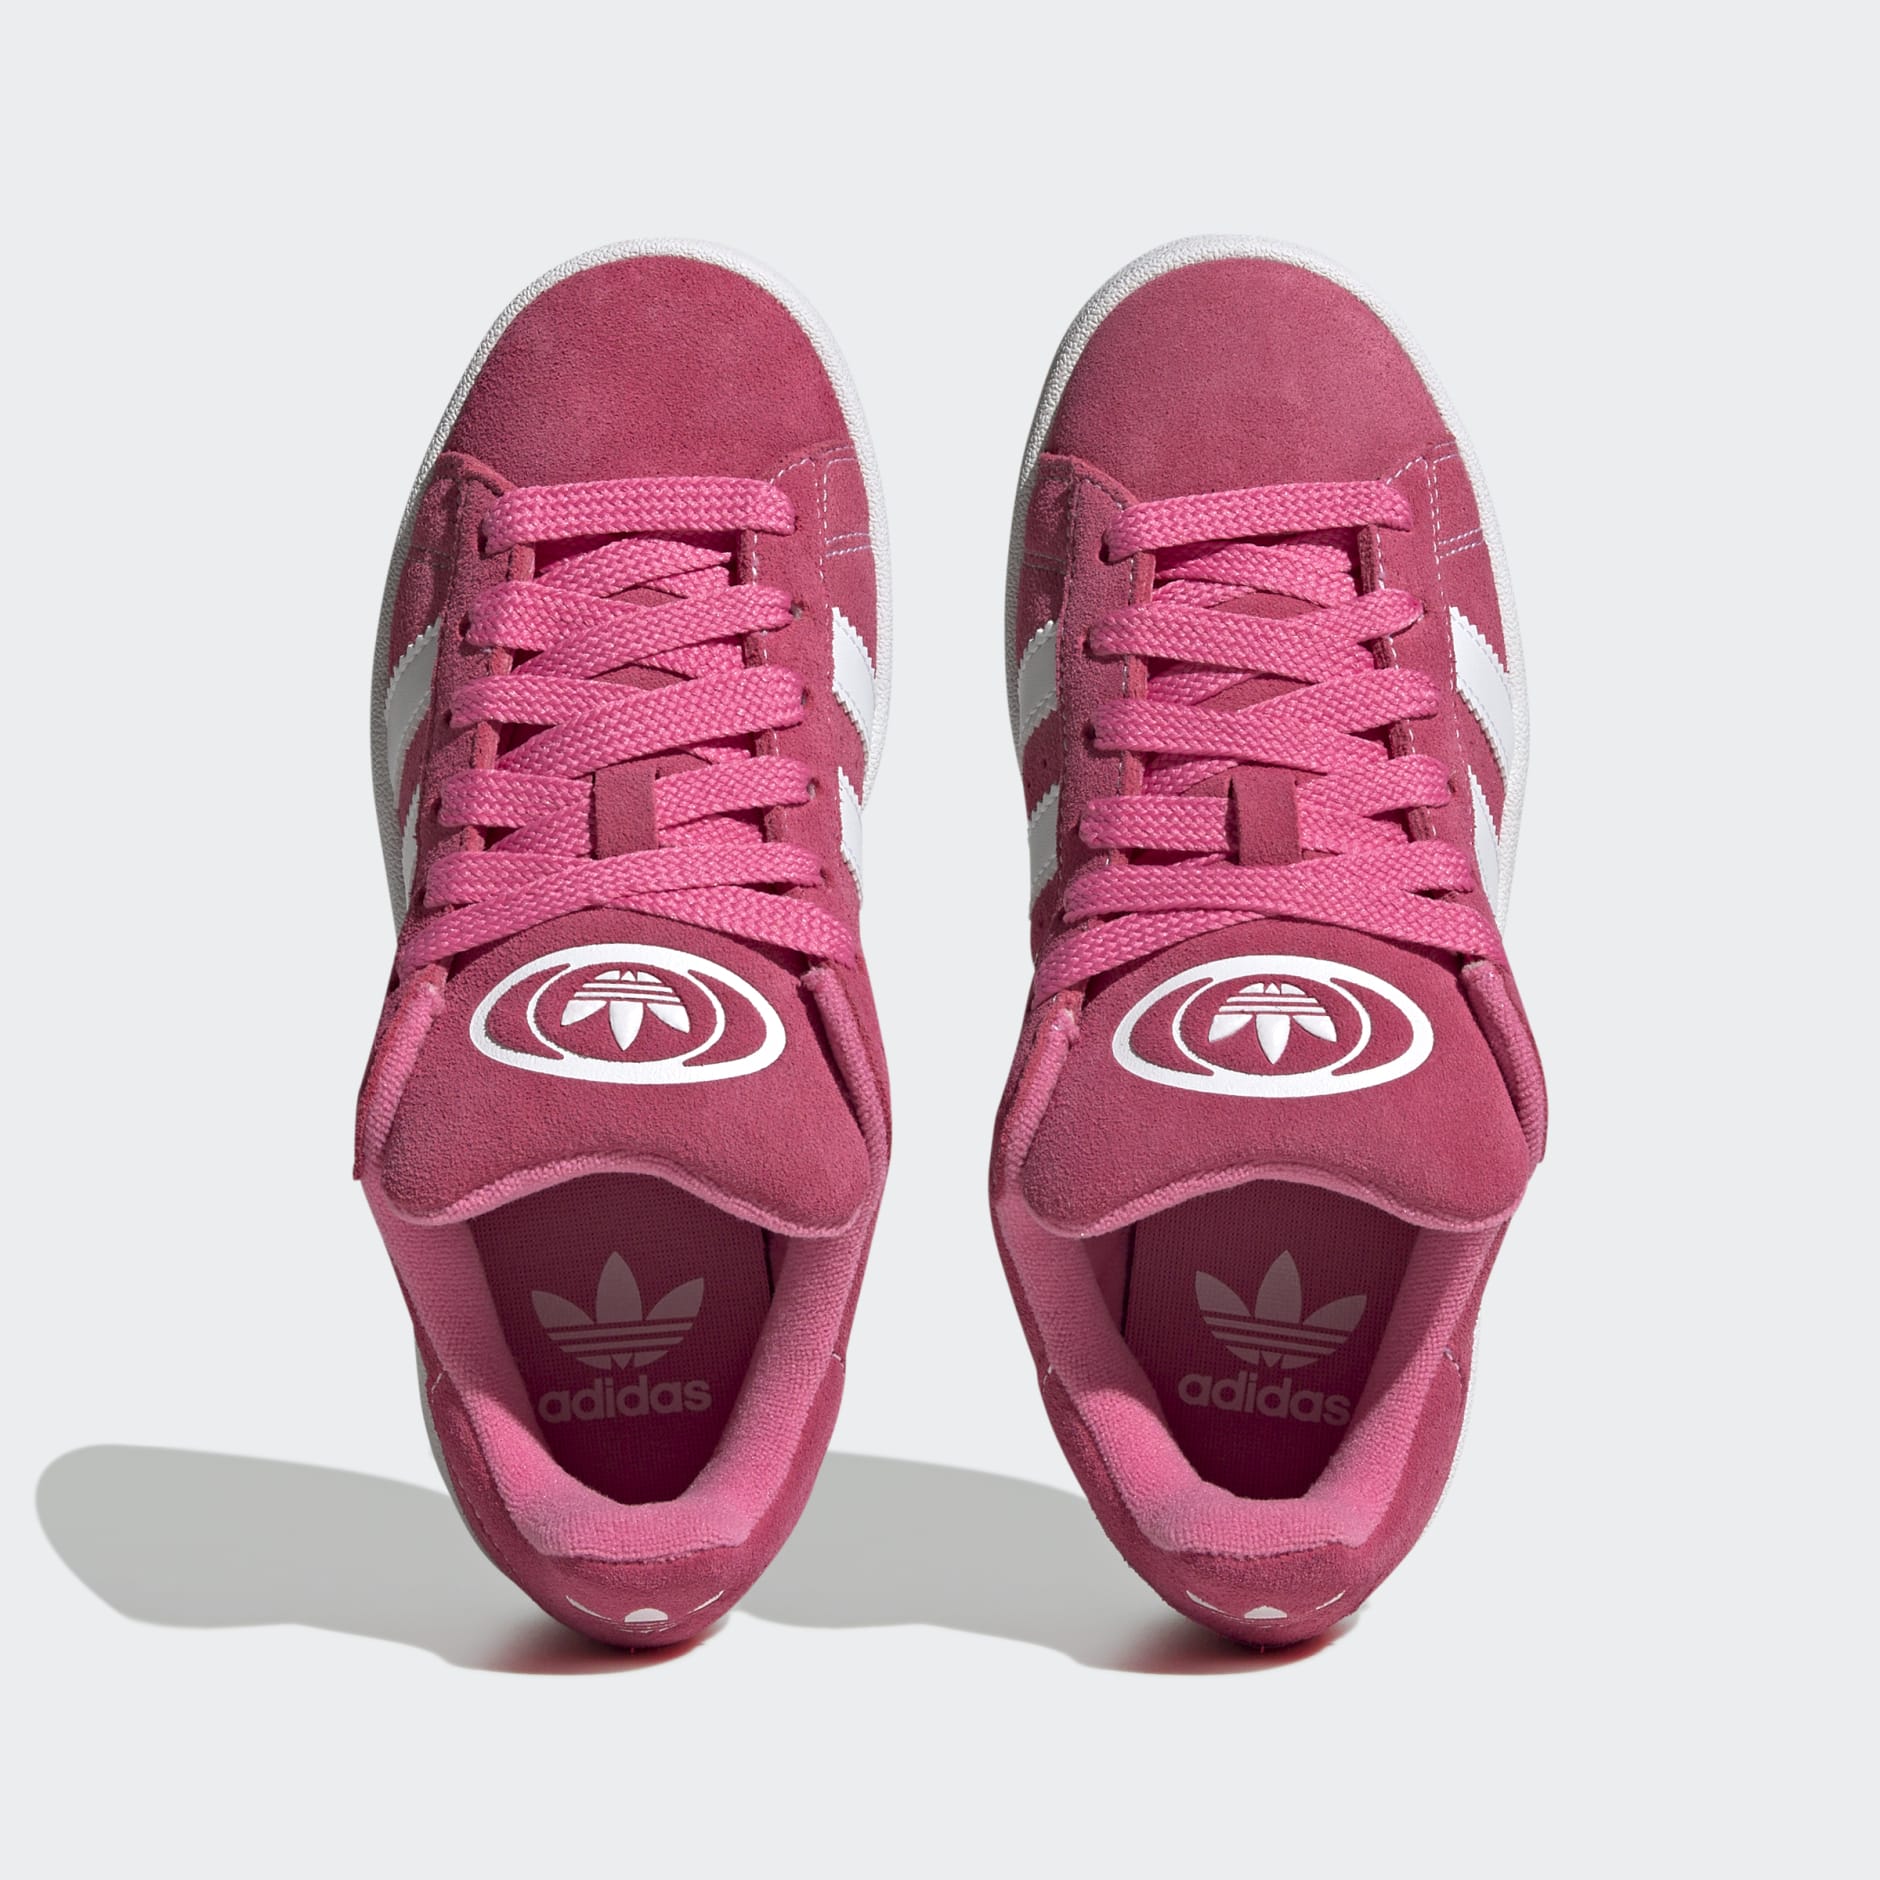 Kids Shoes - Shoes adidas - Pink 00s | Oman Campus